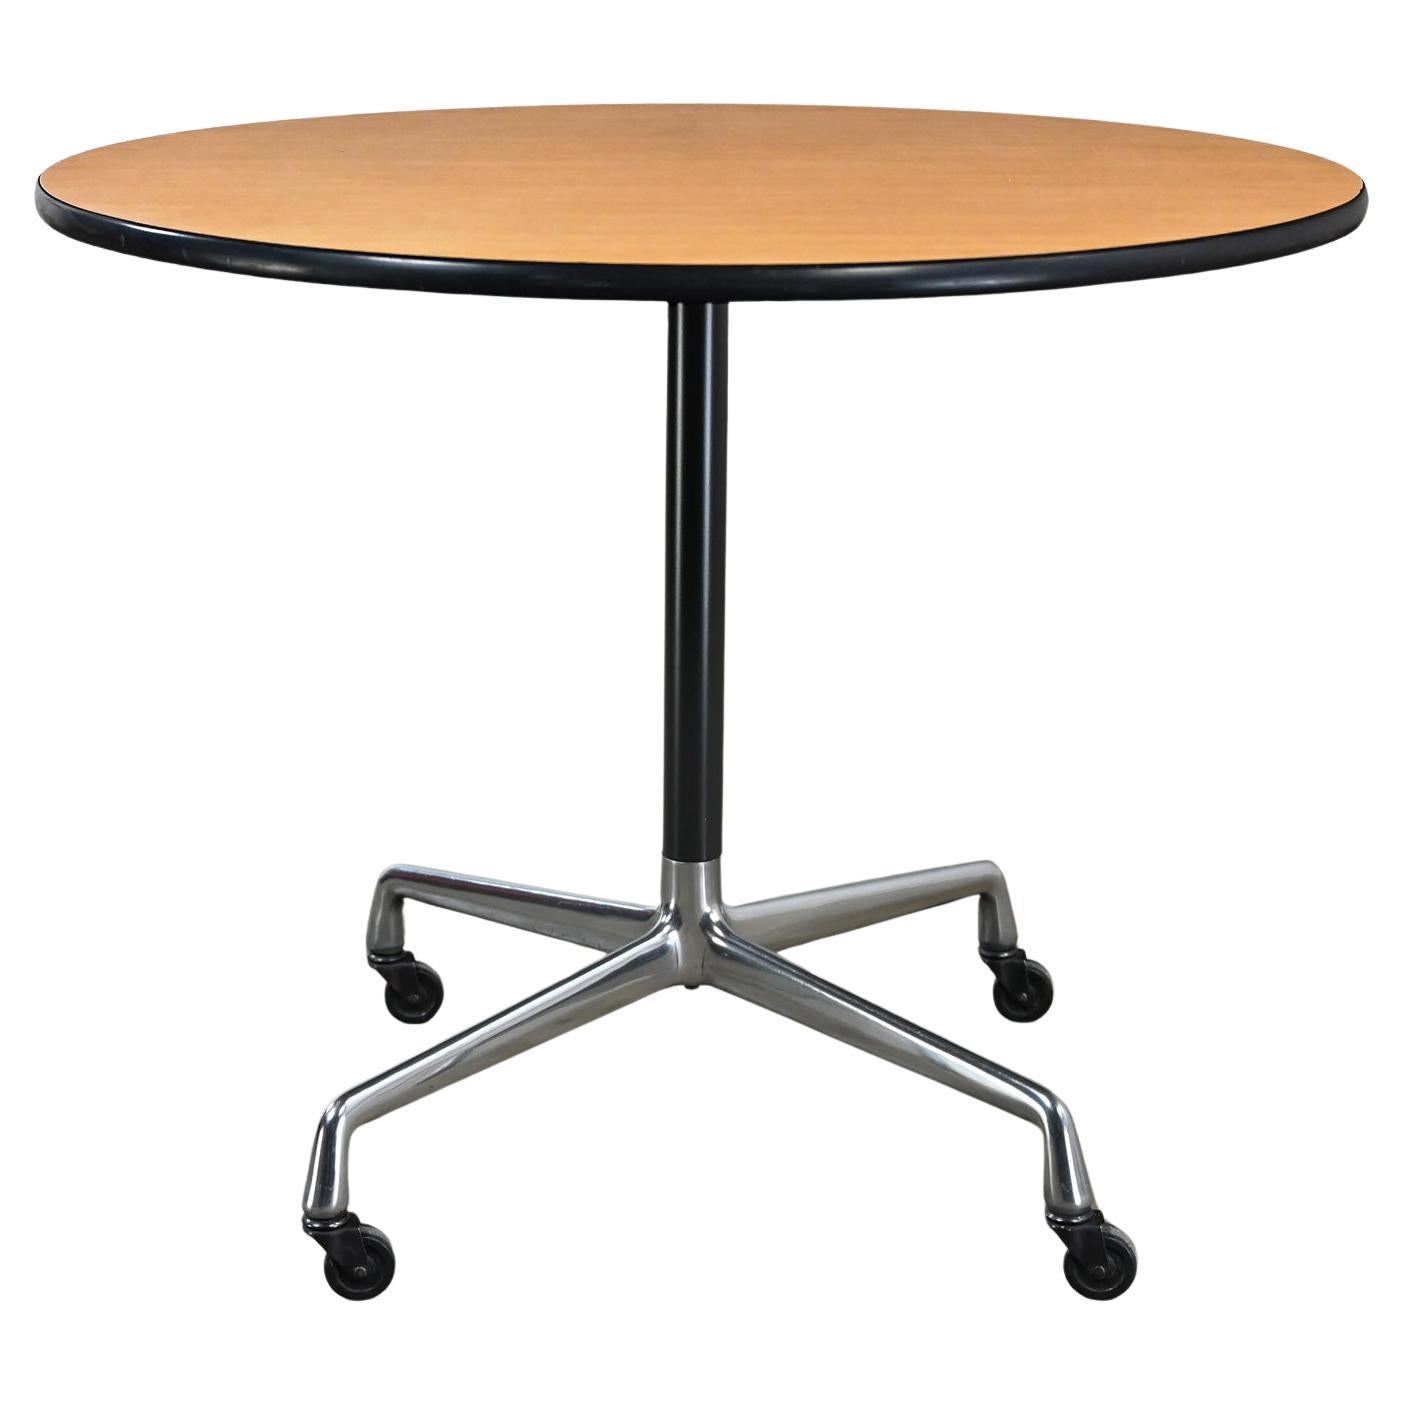 Eames Herman Miller Round Table Universal Base Casters & 36” Blonde Laminate Top For Sale